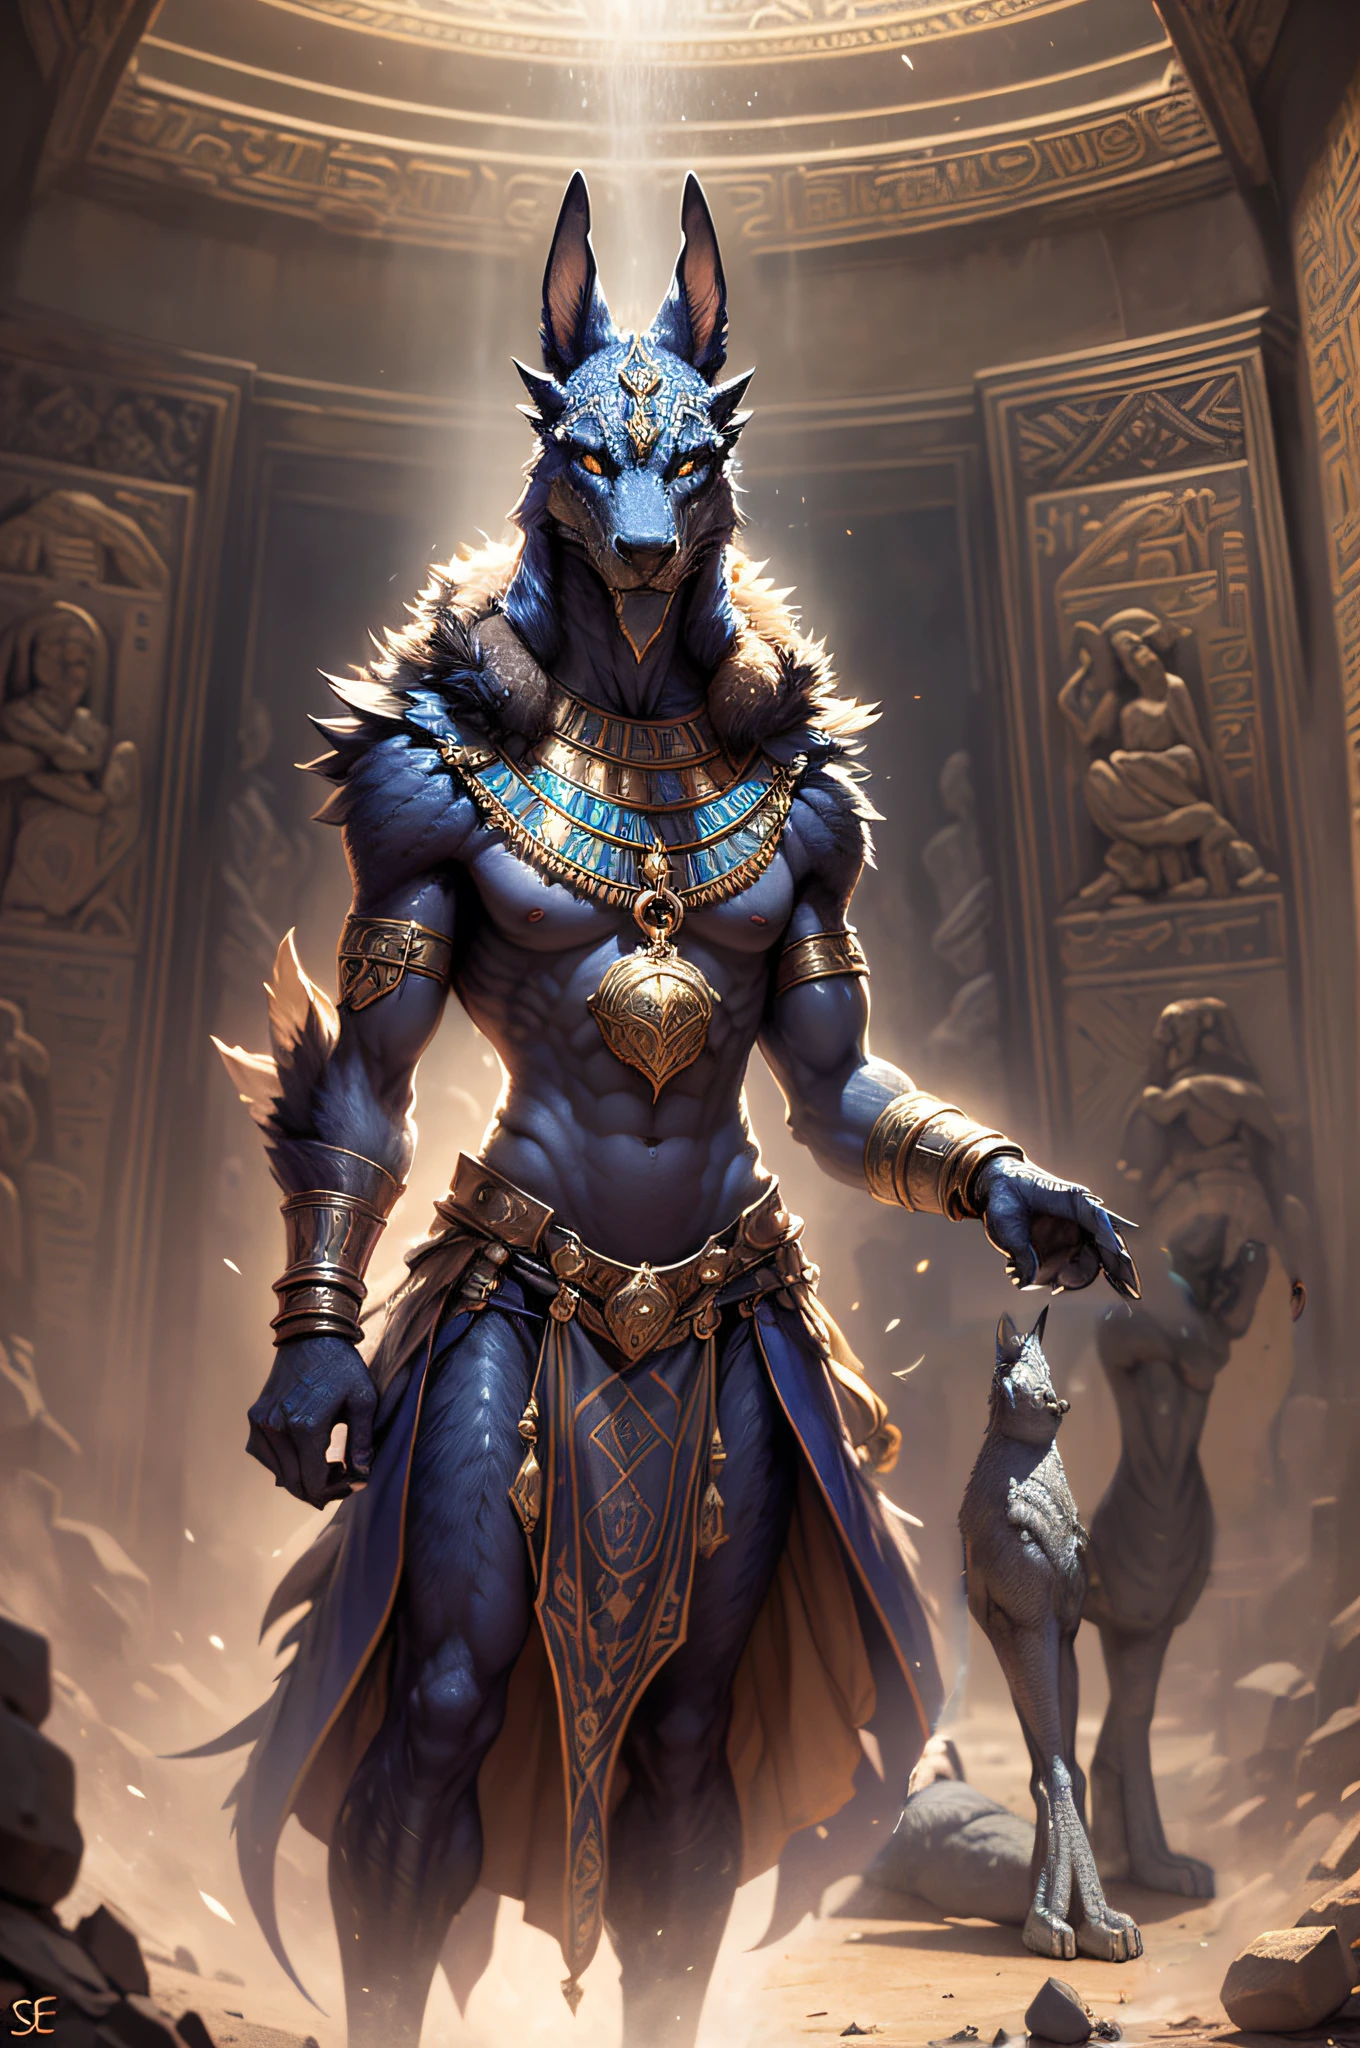 "Capture a stunning image of Anubis, the jackal-headed Egyptian deity, de corpo inteiro. Use camera quality (RSEEmma:1.5) to ensure sharp details and high resolution. Set up cinematic lighting to highlight the textures and features of the figure . The setting should reflect a slightly elevated twilight, providing a mystical and solemn atmosphere. Make sure the representation respects Egyptian mythology, conveying the duality of Anubis as guardian of the tombs and spiritual guide. This image will be aimed at an audience that appreciates exceptional visual quality and meticulous detail."